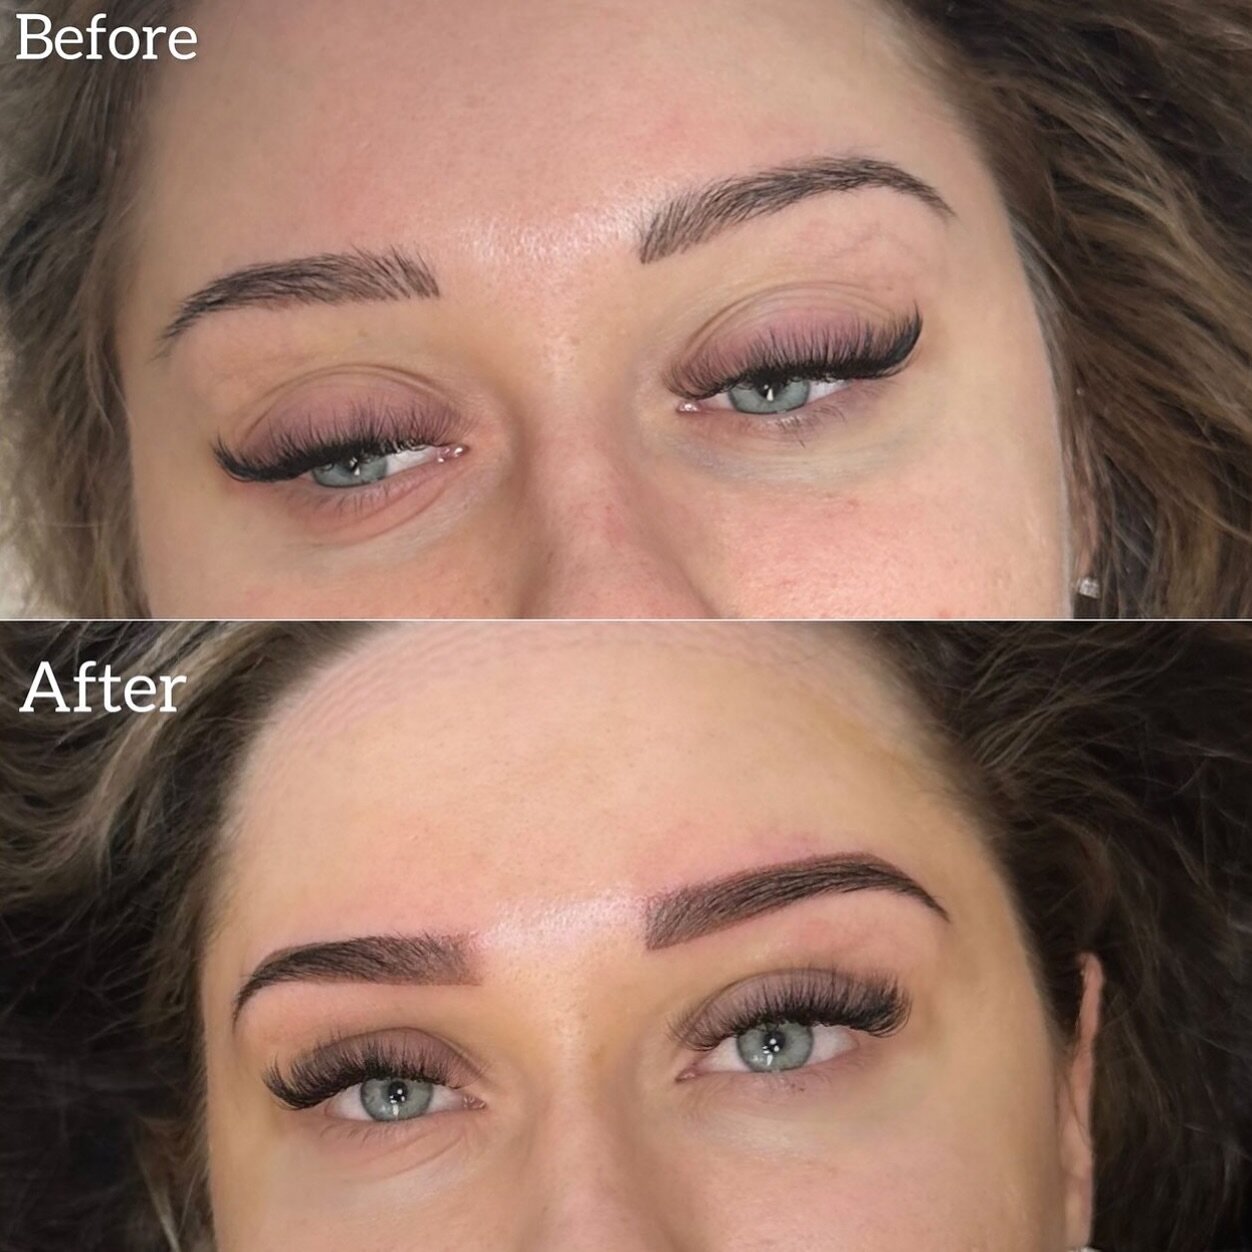 Before and After and Ombr&eacute; Brow by Master Artist, Amanda. To book a consultation or an appointment with Amanda, click the link in our bio 👆🏼

#ombrebrows #browsonfleek #browsonpoint